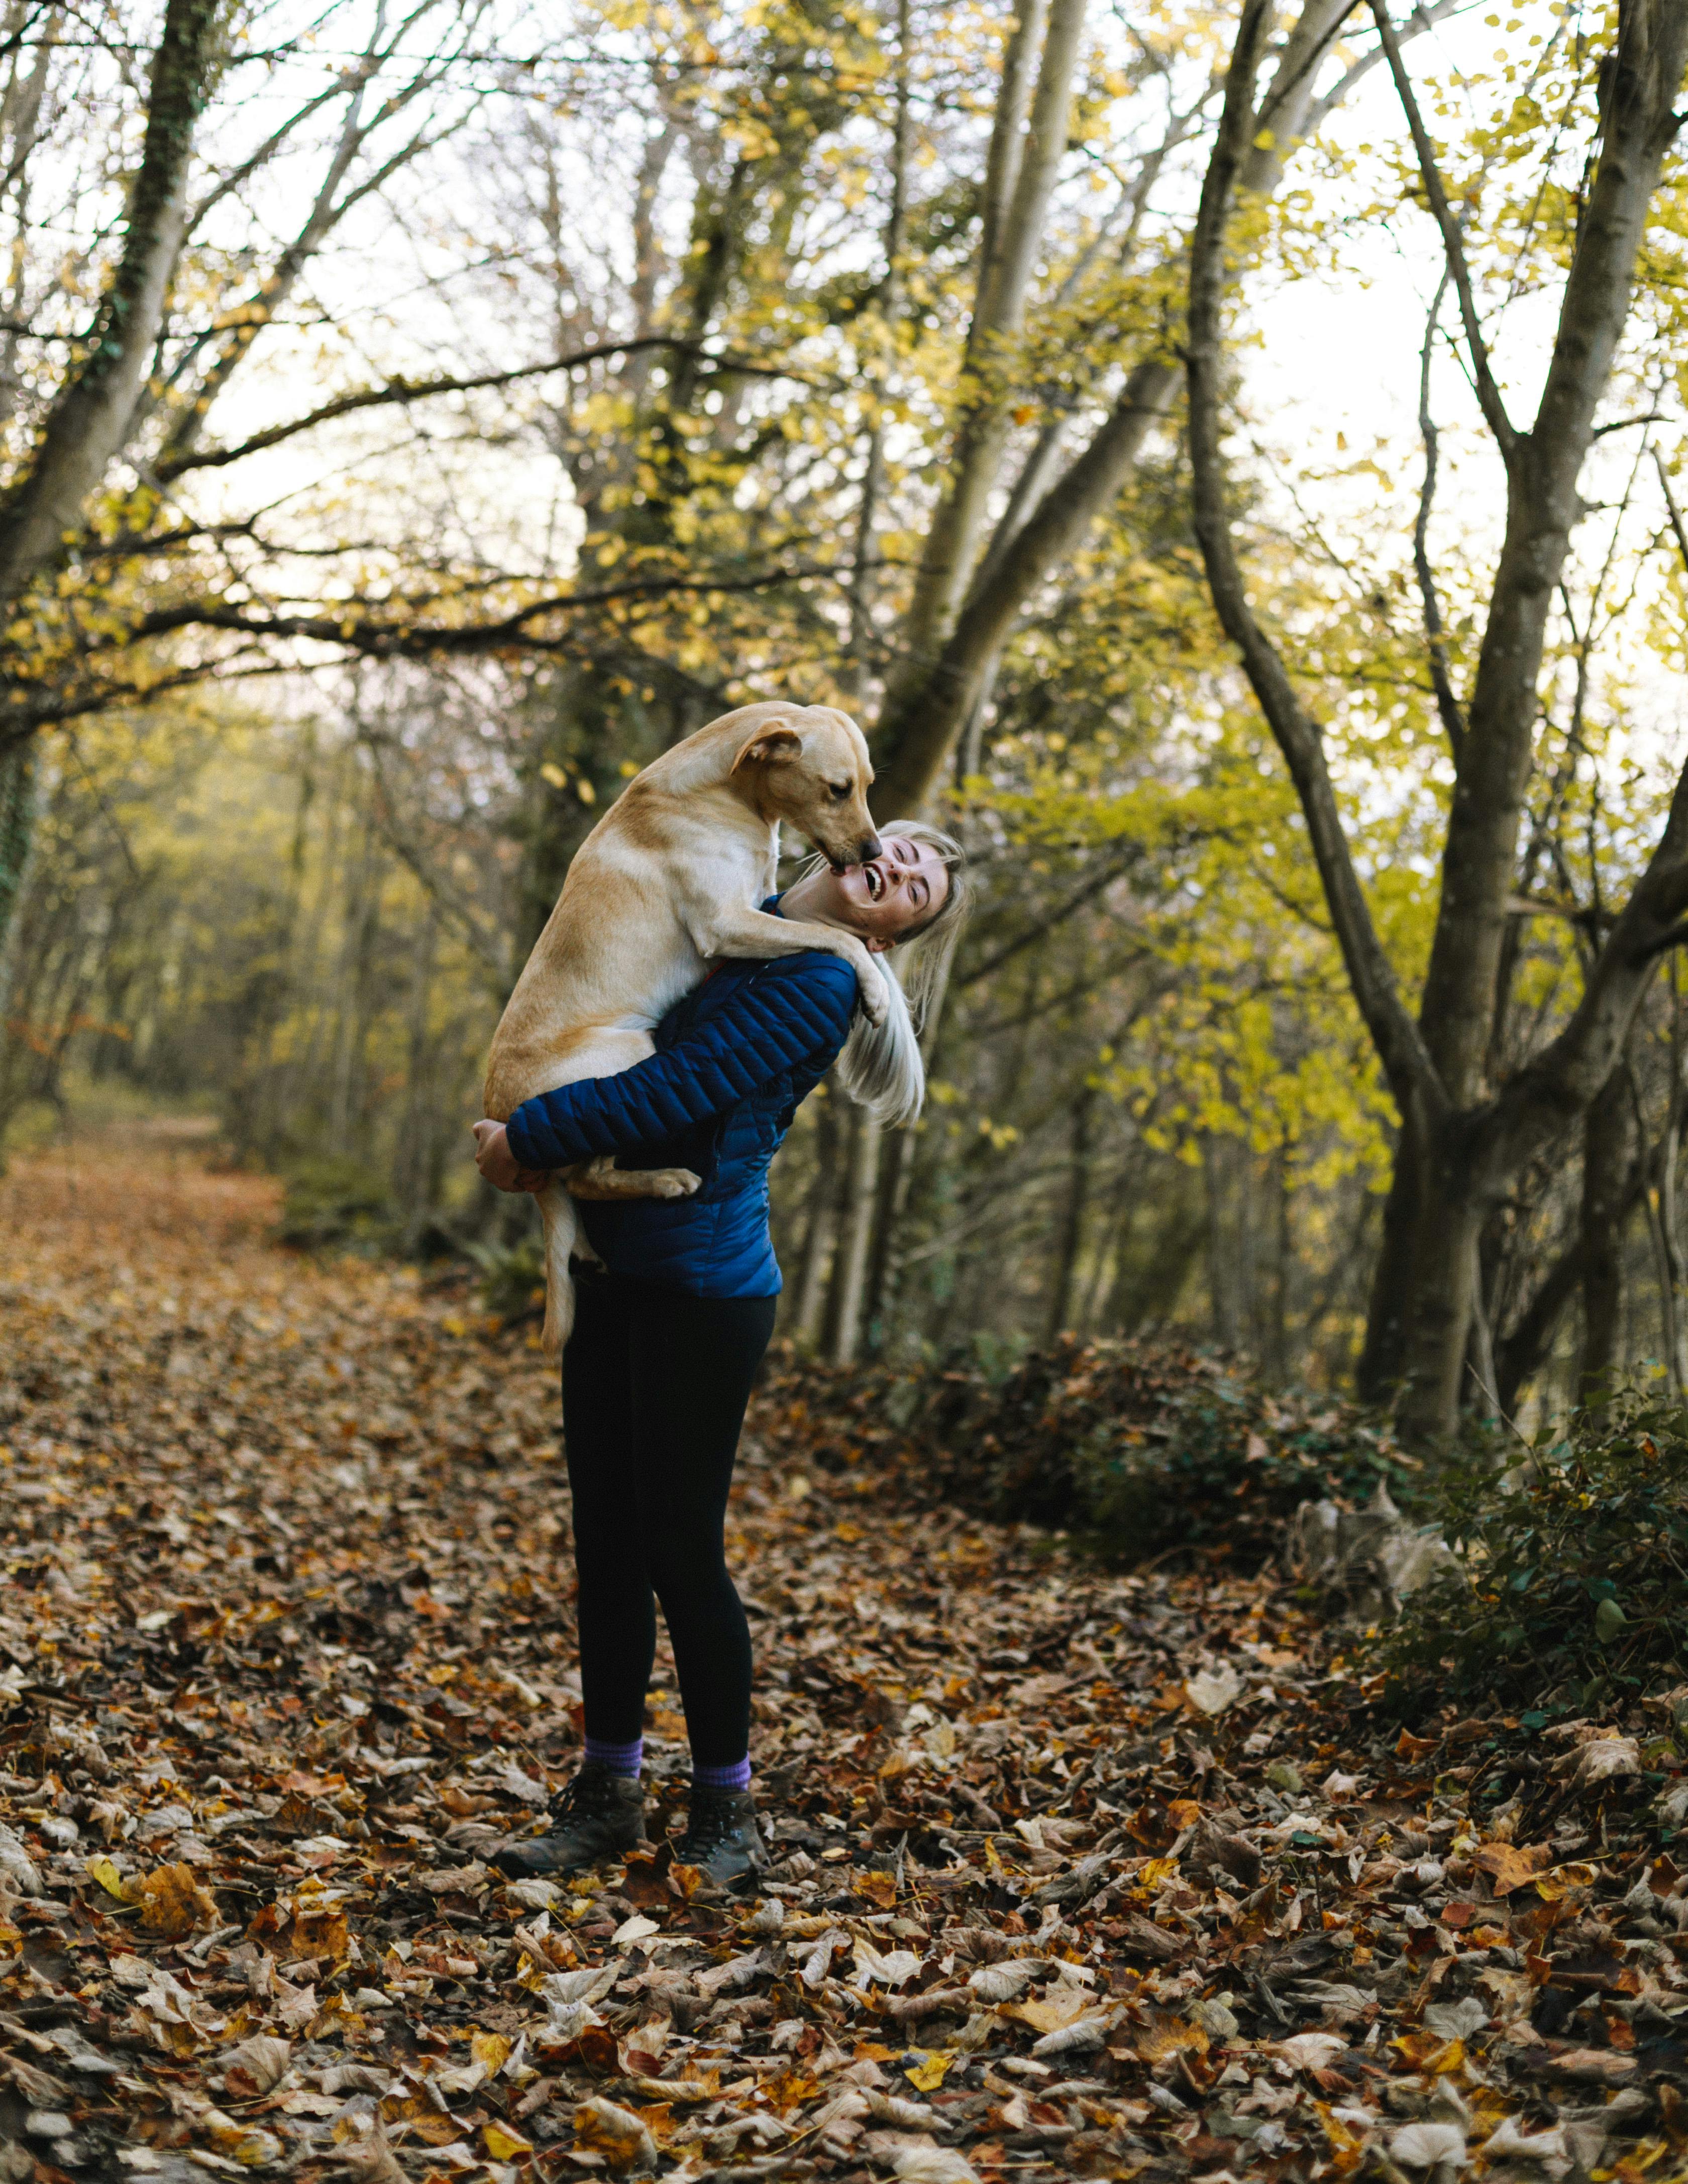 A woman with her dog | Source: Pexels